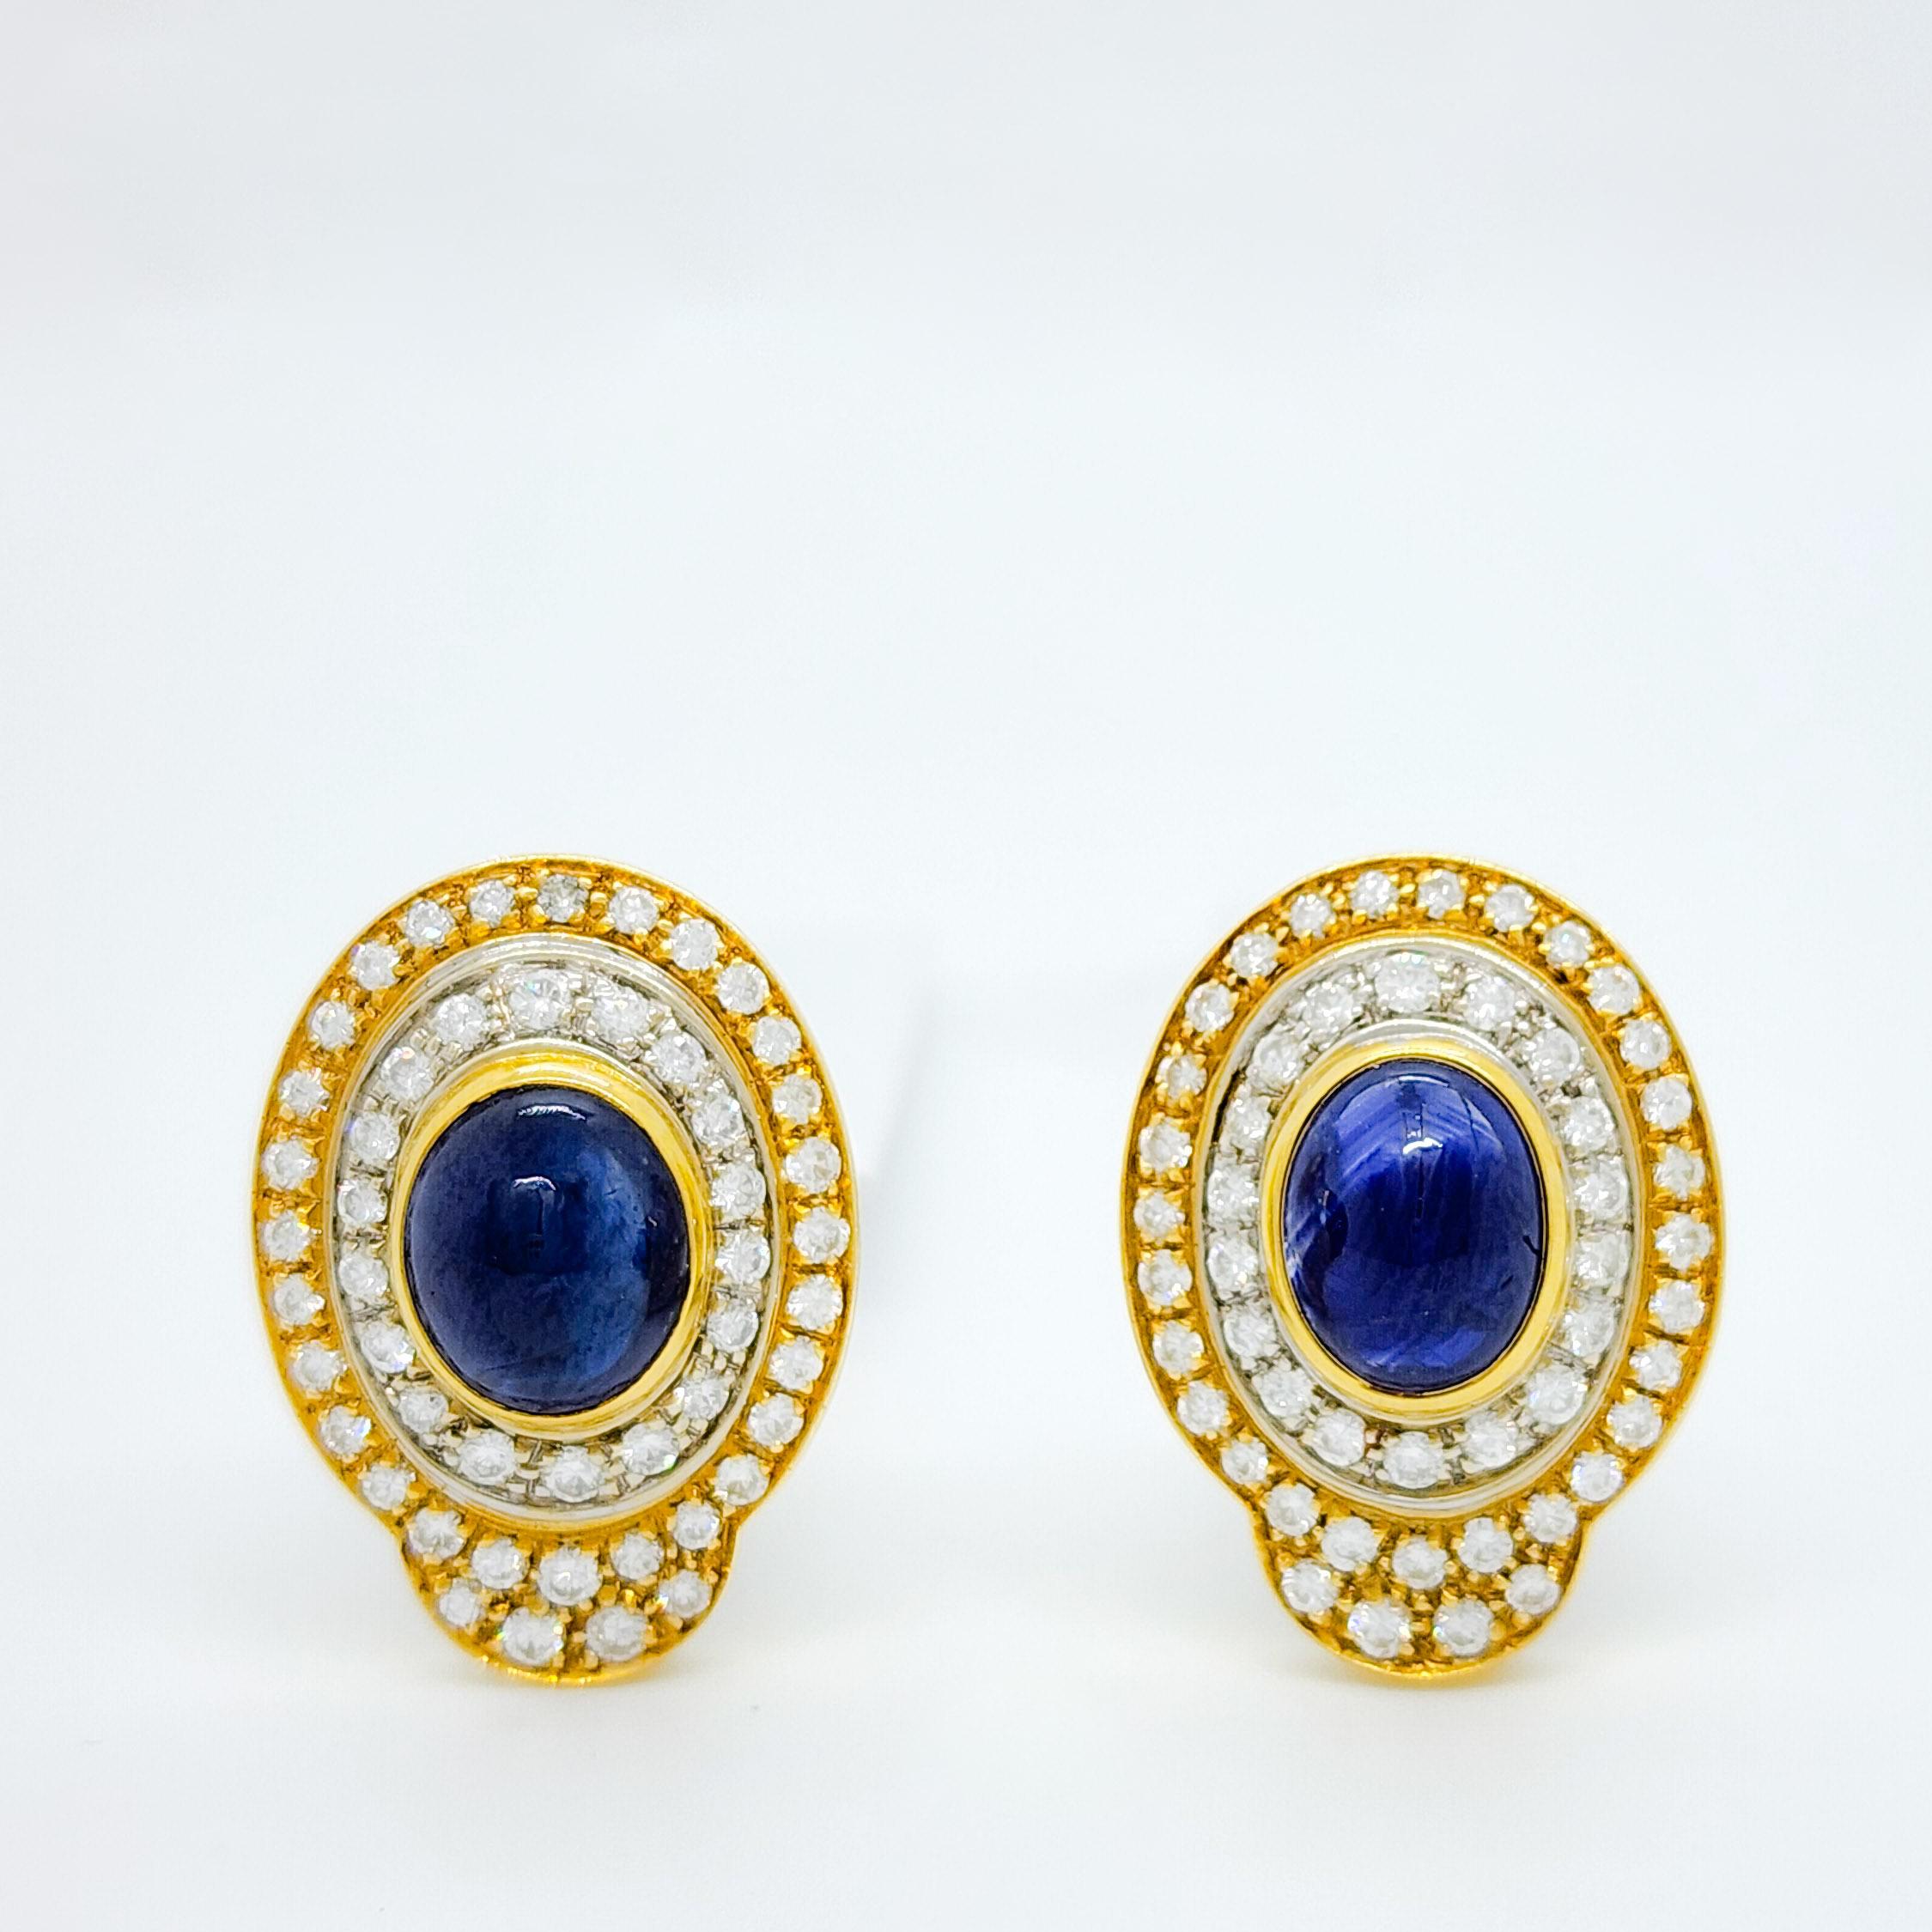 Beautiful 4.00 ct. blue sapphire oval cabochons with 3.00 ct. good quality white diamond rounds.  Handmade in 18k yellow and white gold.